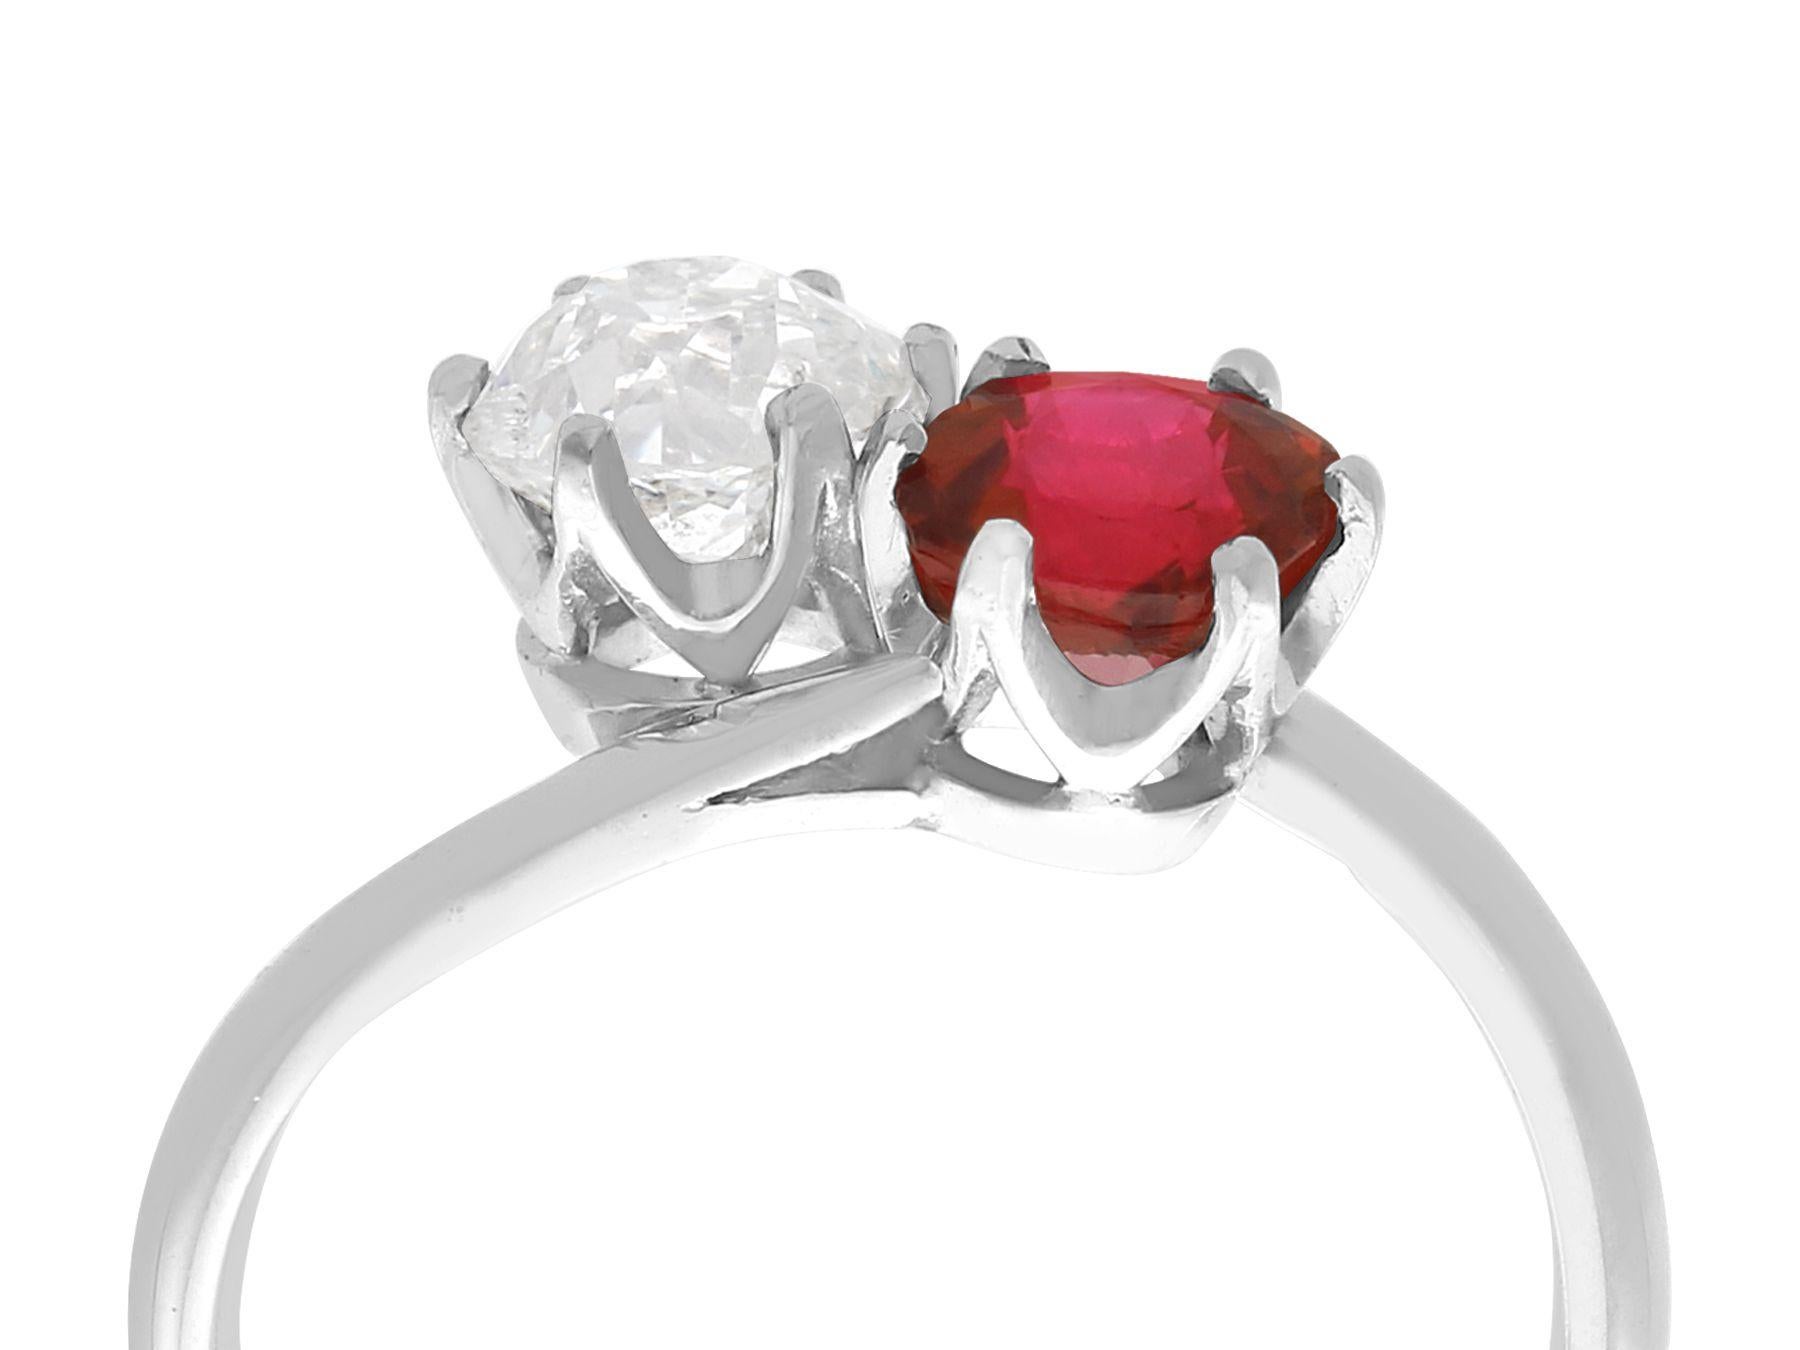 An impressive antique French 1.35 carat Thai ruby and 0.97 carat diamond, 18 karat white gold and platinum set twist ring; part of our diverse antique jewellery collections

This stunning, fine and impressive antique ruby and diamond ring has been